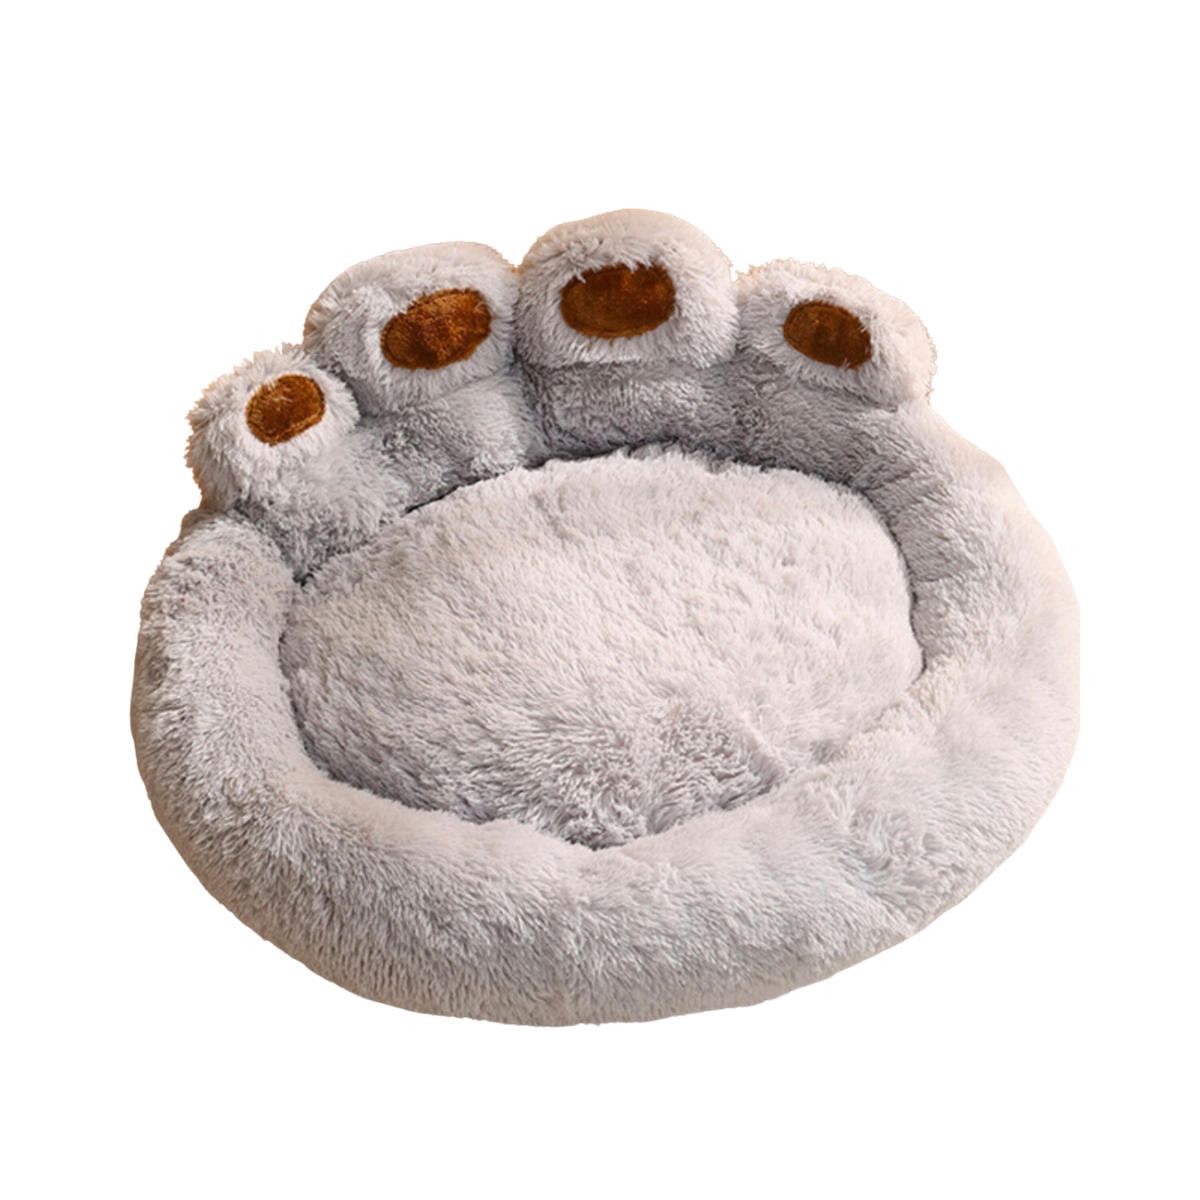 Pampered Pups™ - #1 Top-Rated Anti-Anxiety Calming Donut Bed for Cats and Dogs